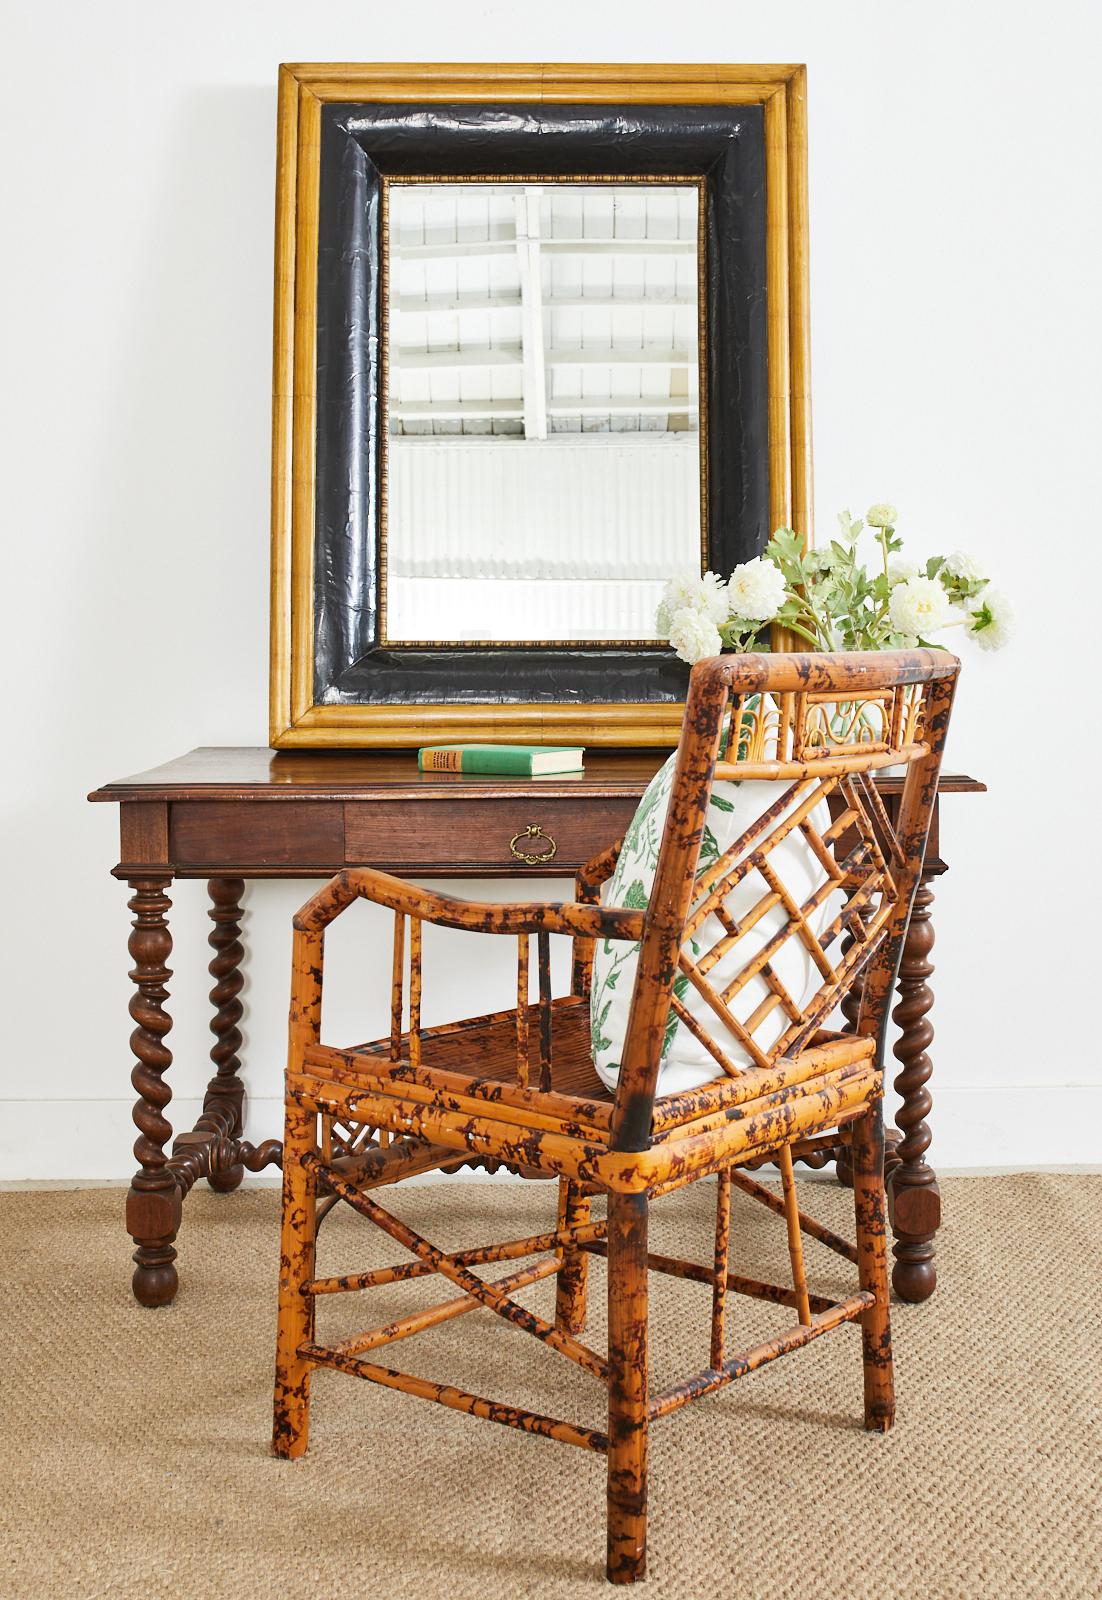 Brighton pavilion style Chinese export bamboo armchair featuring Chinese chippendale rattan fretwork. The chair frame is crafted from gorgeous tortoise shell style bamboo with dramatic color and patterns. Beautifully crafted with strong joinery and